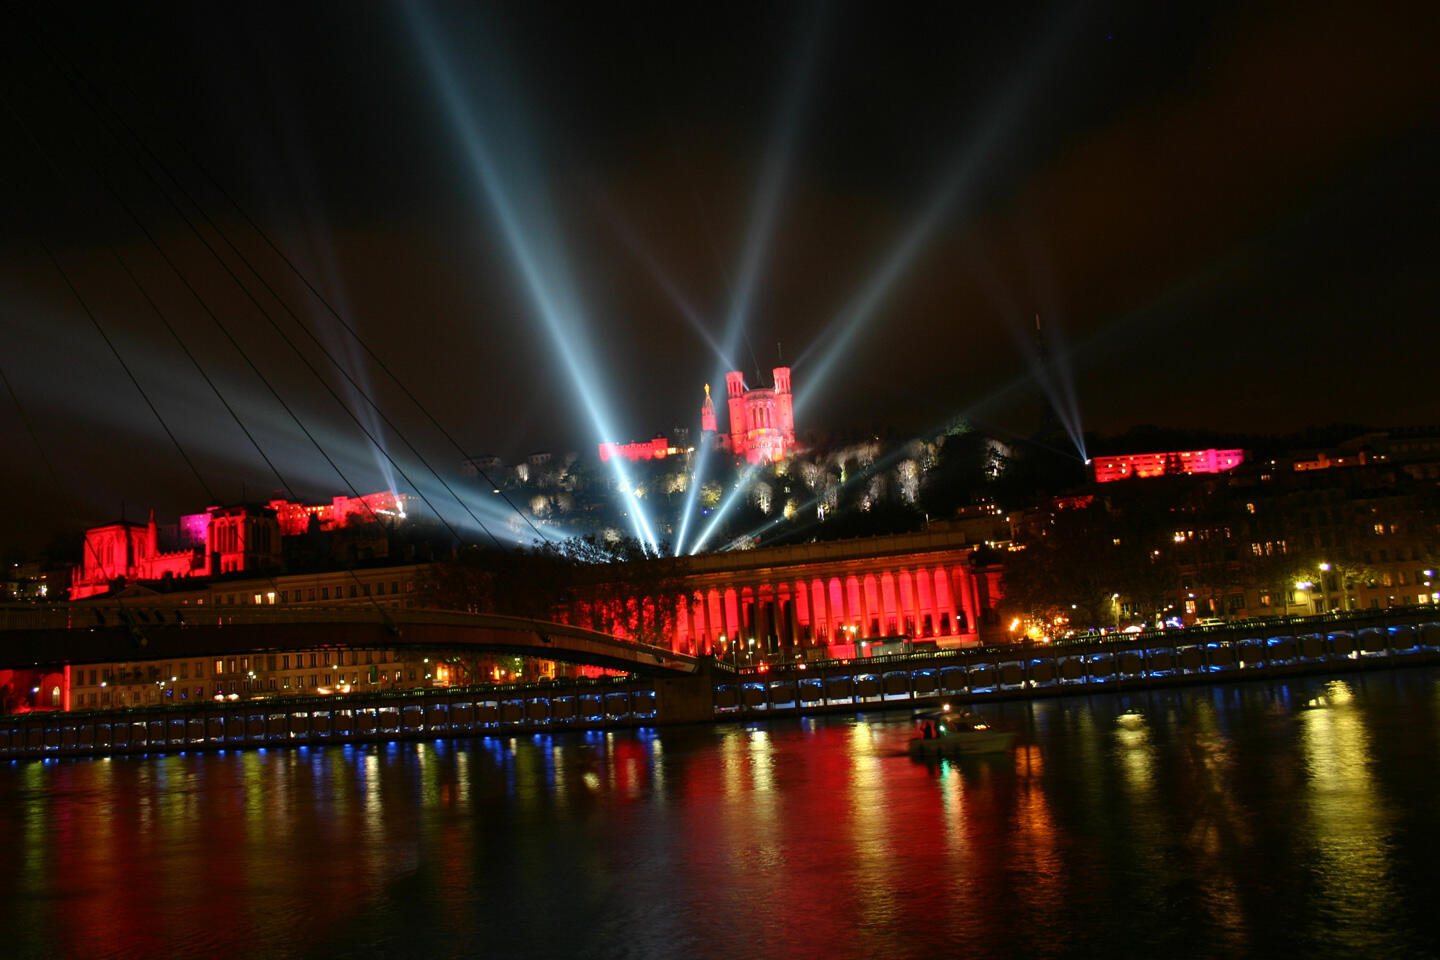 Night view of the Festival of Lights in Lyon, with spotlights illuminating the Basilica of Fourvière and the historic courthouse in red, reflecting on the Saône River.